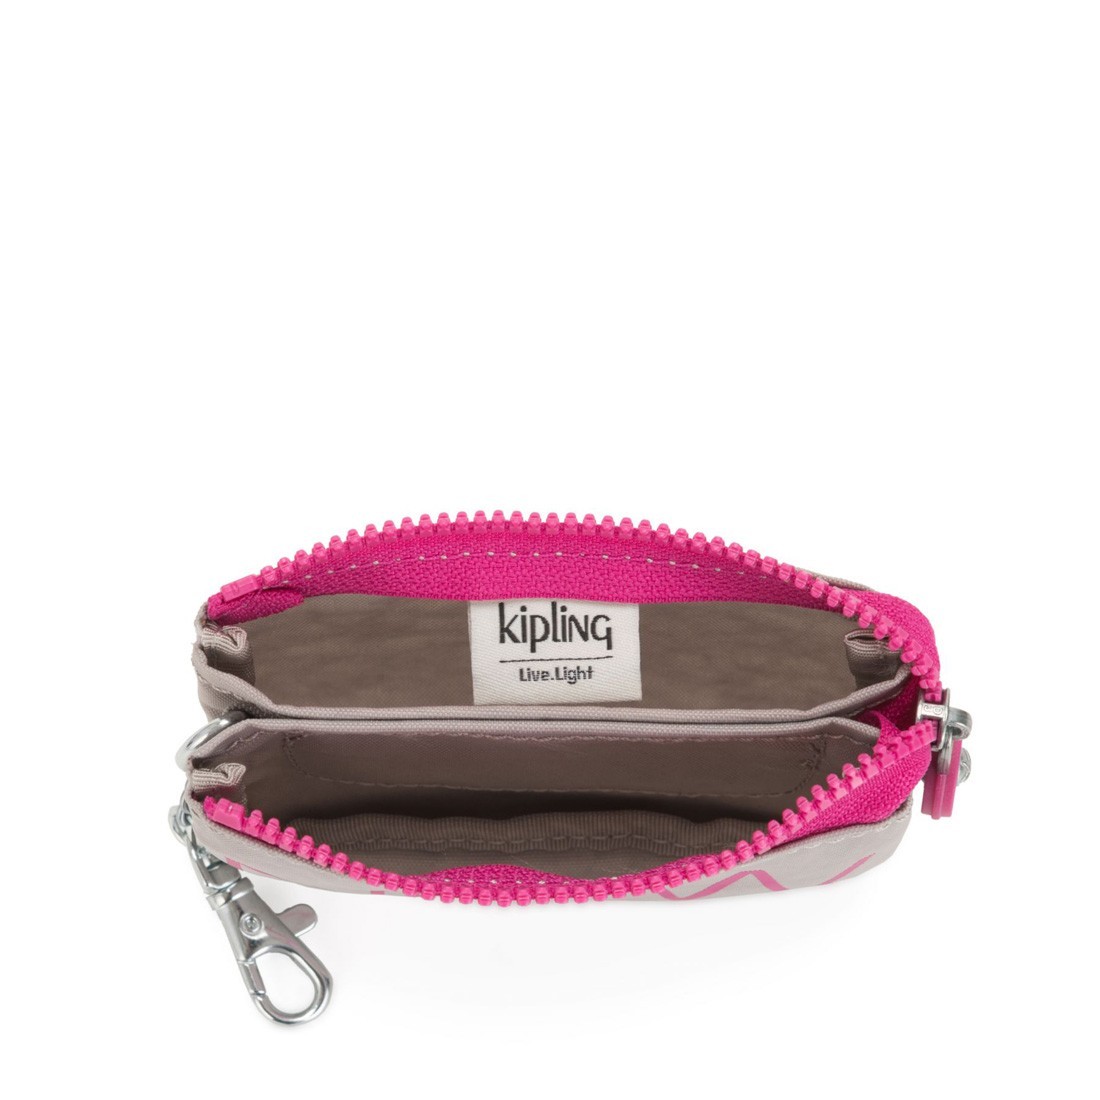 Order Kipling Mini Creativity Small Purse with Keychain - Now - Kipling,  delivered to your home | The Outfit